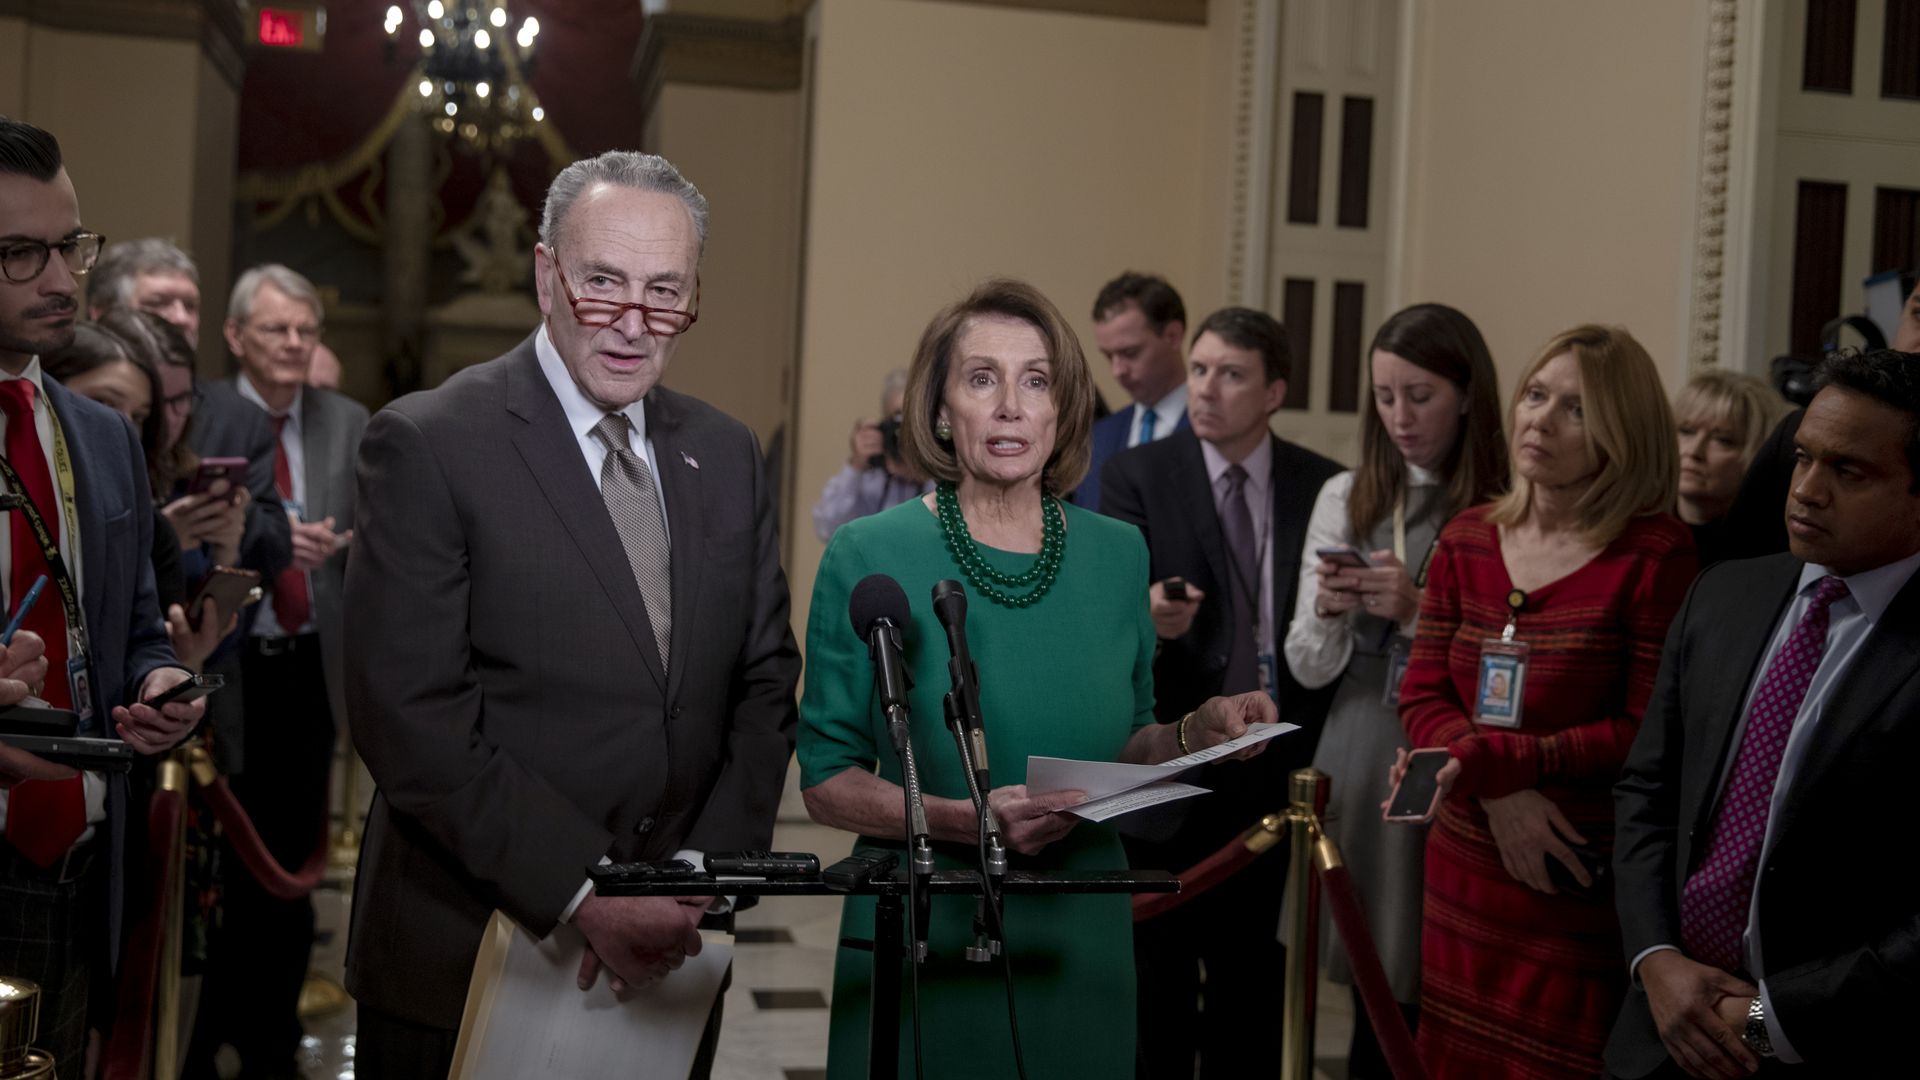 Chuck Schumer and Nancy Pelosi look flabbergasted.